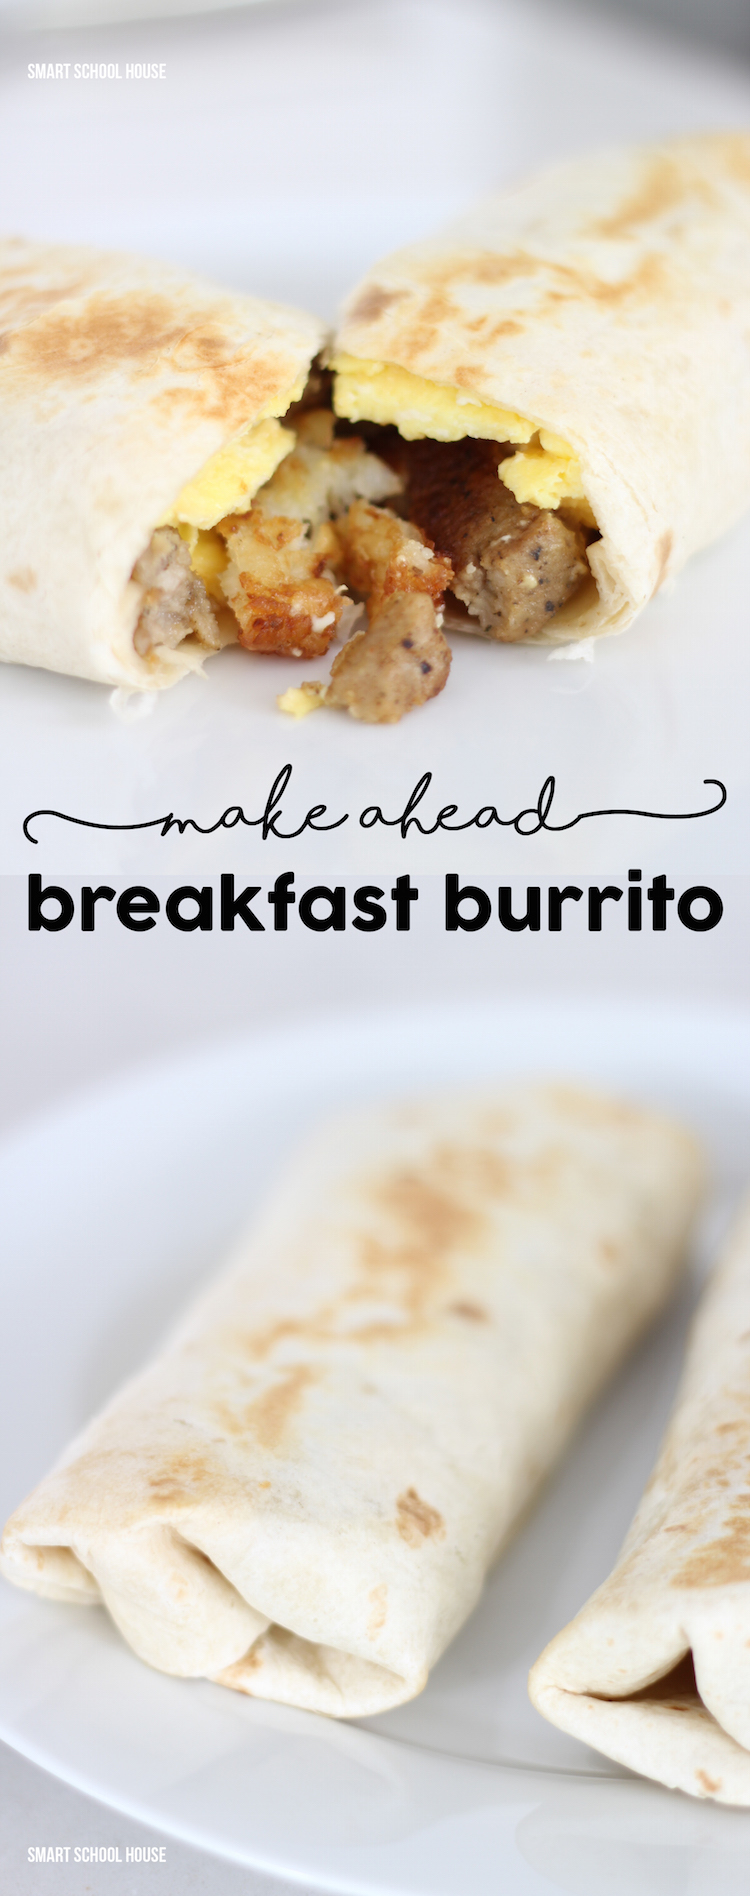 Make Ahead Sausage Hash Brown Breakfast Burrito - this recipe is a family favorite!